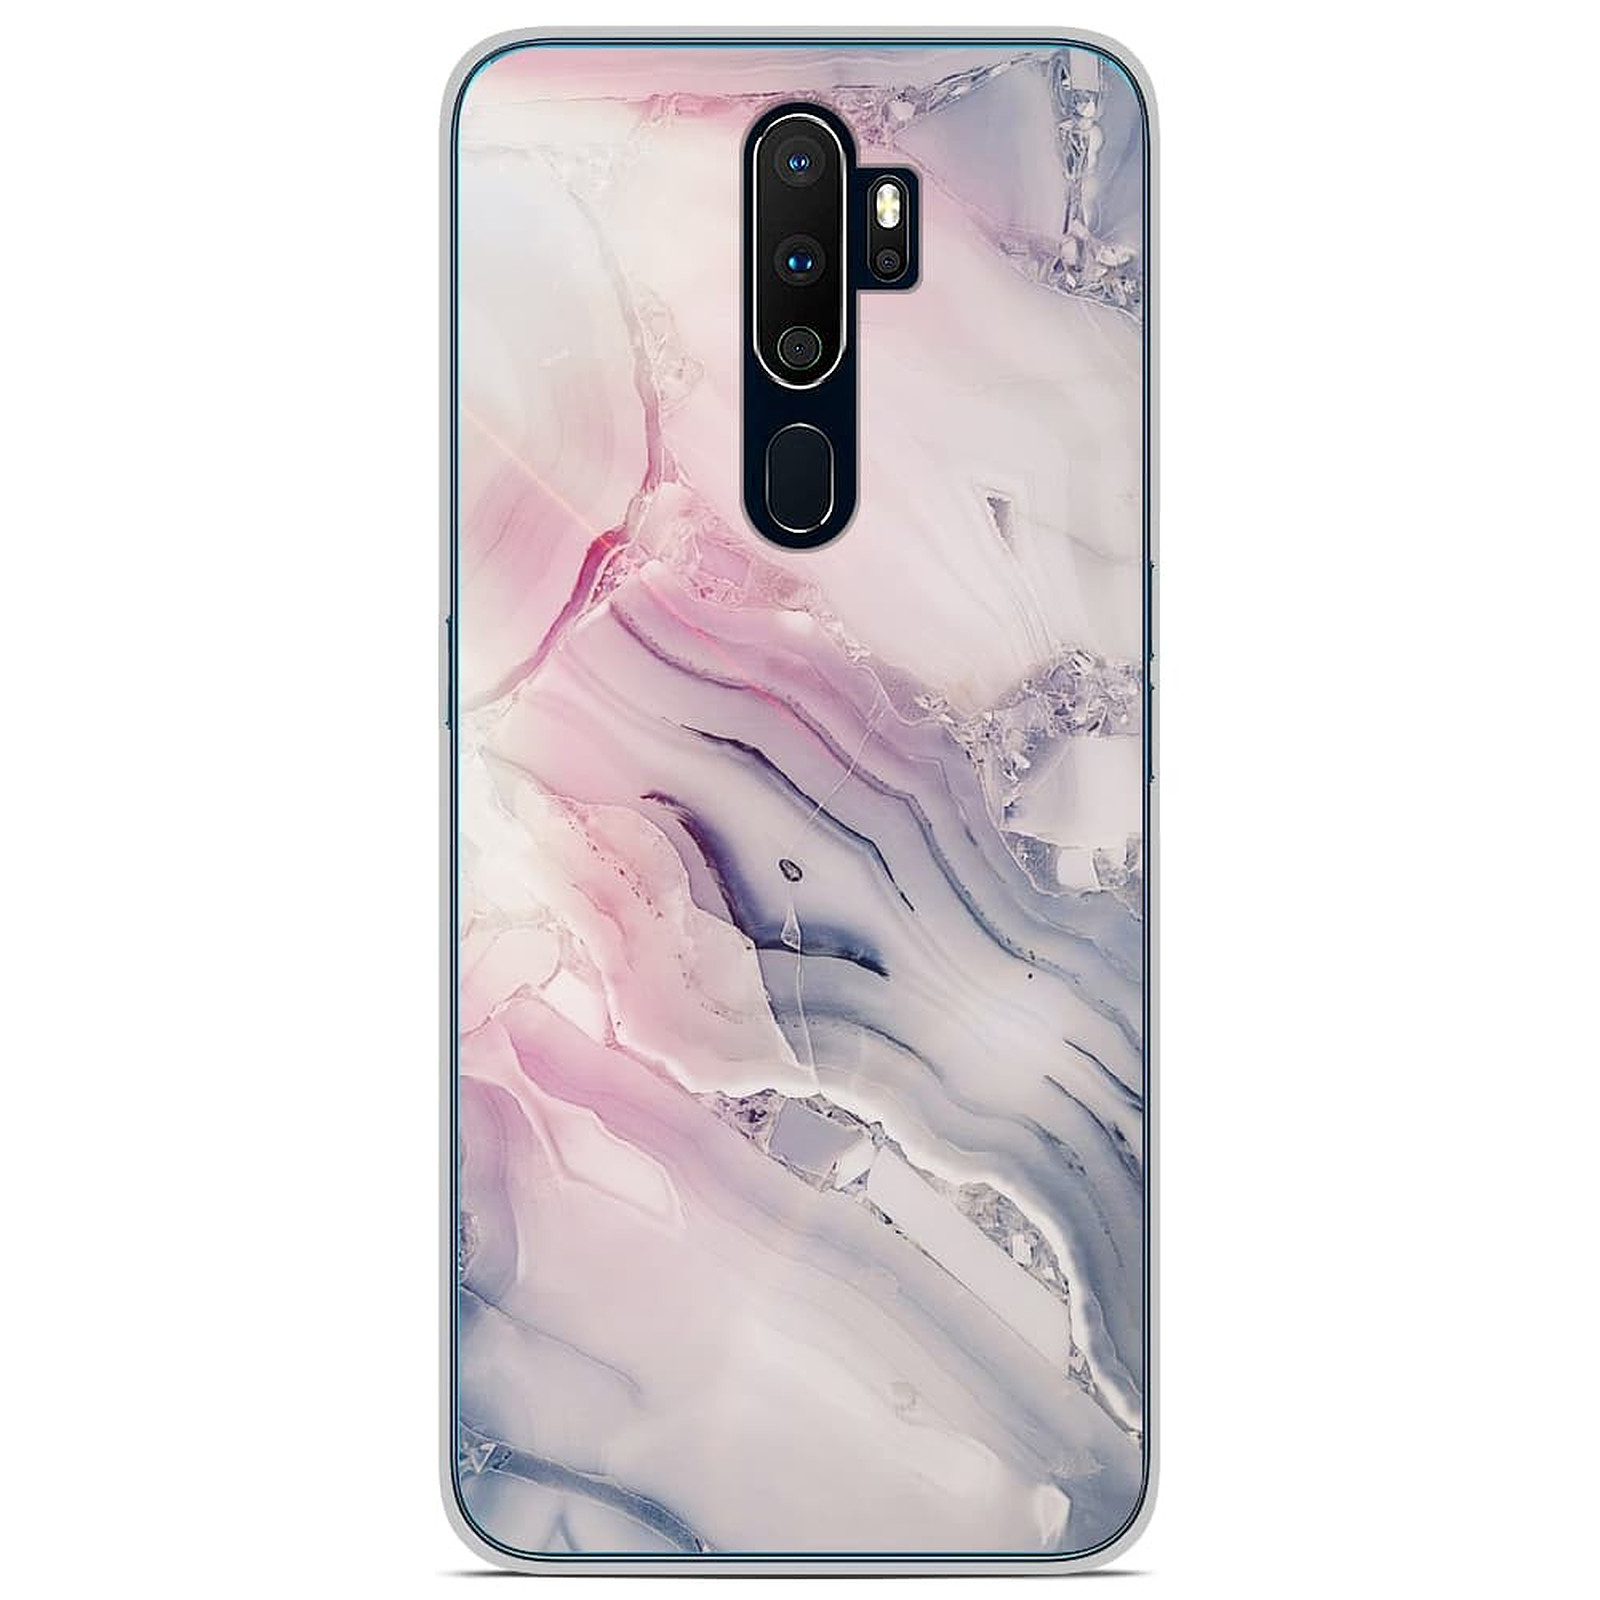 1001 Coques Coque silicone gel Oppo A9 2020 motif Zoom sur Pierre Claire - Coque telephone 1001Coques